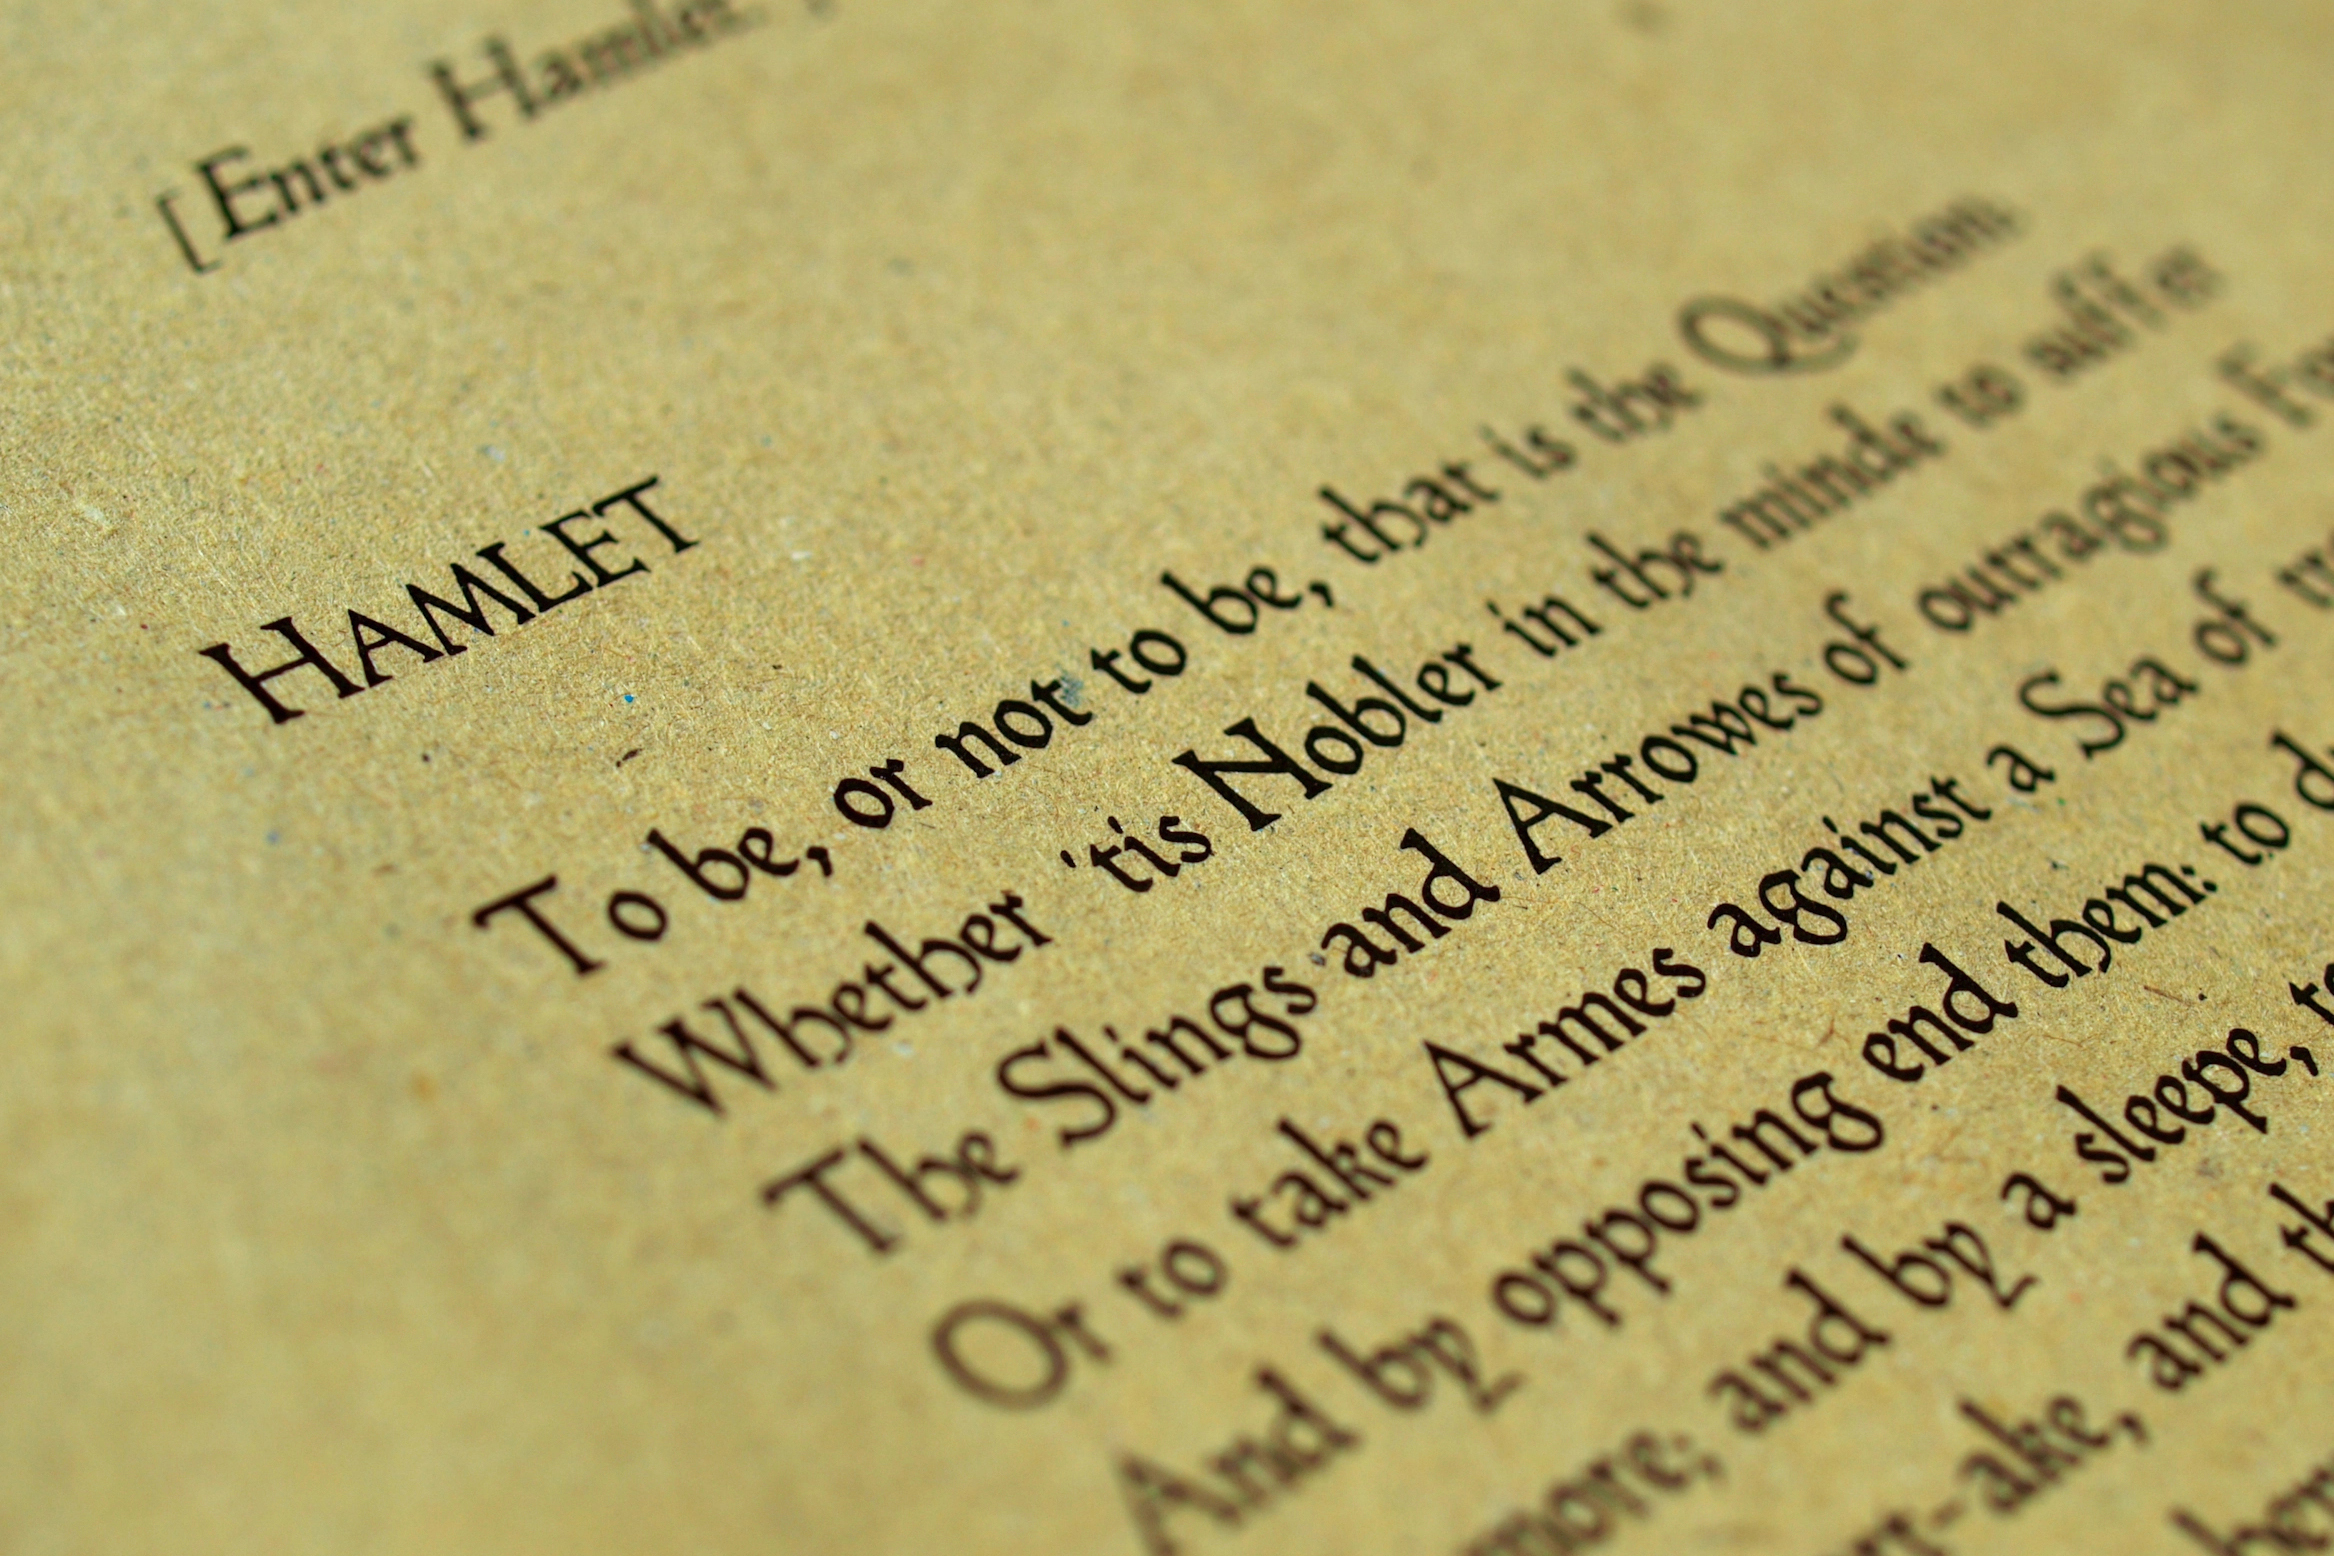 A close up view of the text of the Shakespeare play, The Tragedy of Hamlet Prince of Denmark. The lines are of Hamlet's famous monologue that begins with, "To be, or not to be"